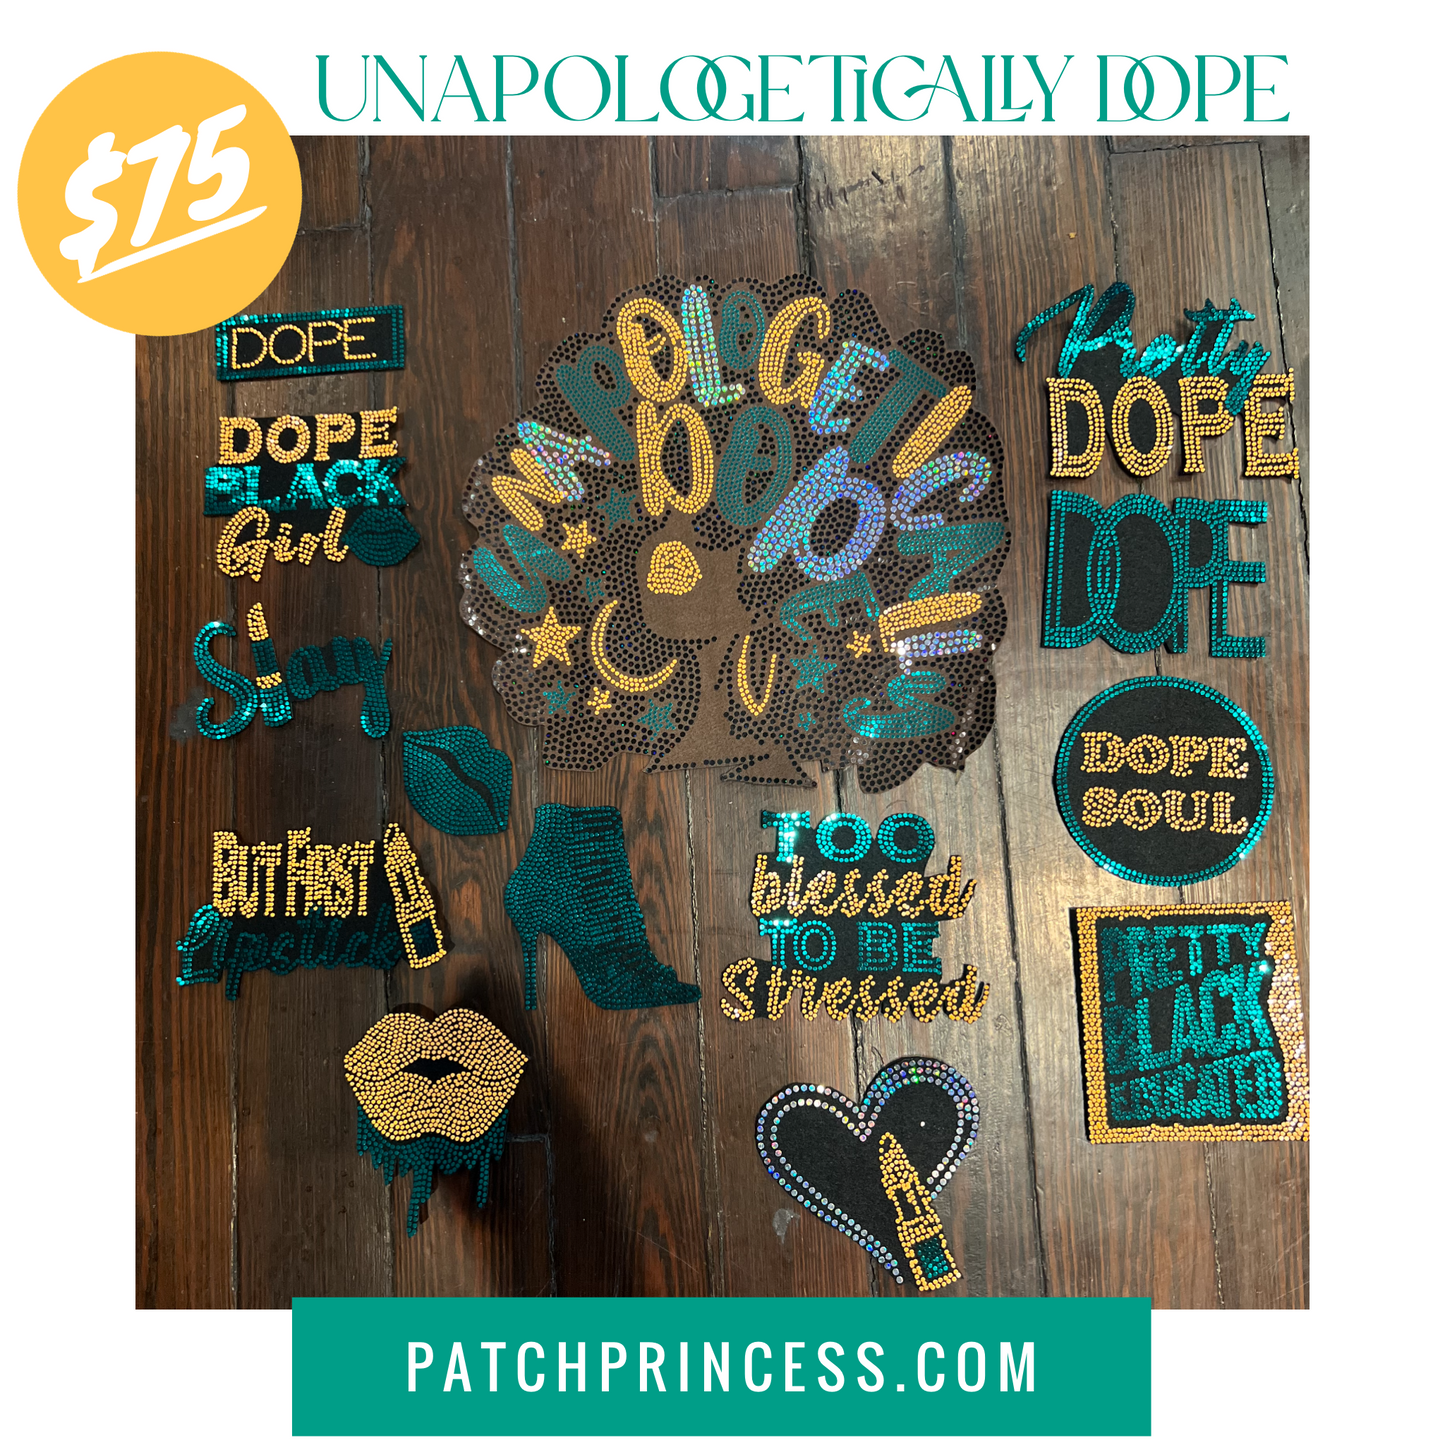 UNAPOLOGETICALLY DOPE 15 PATCH SET